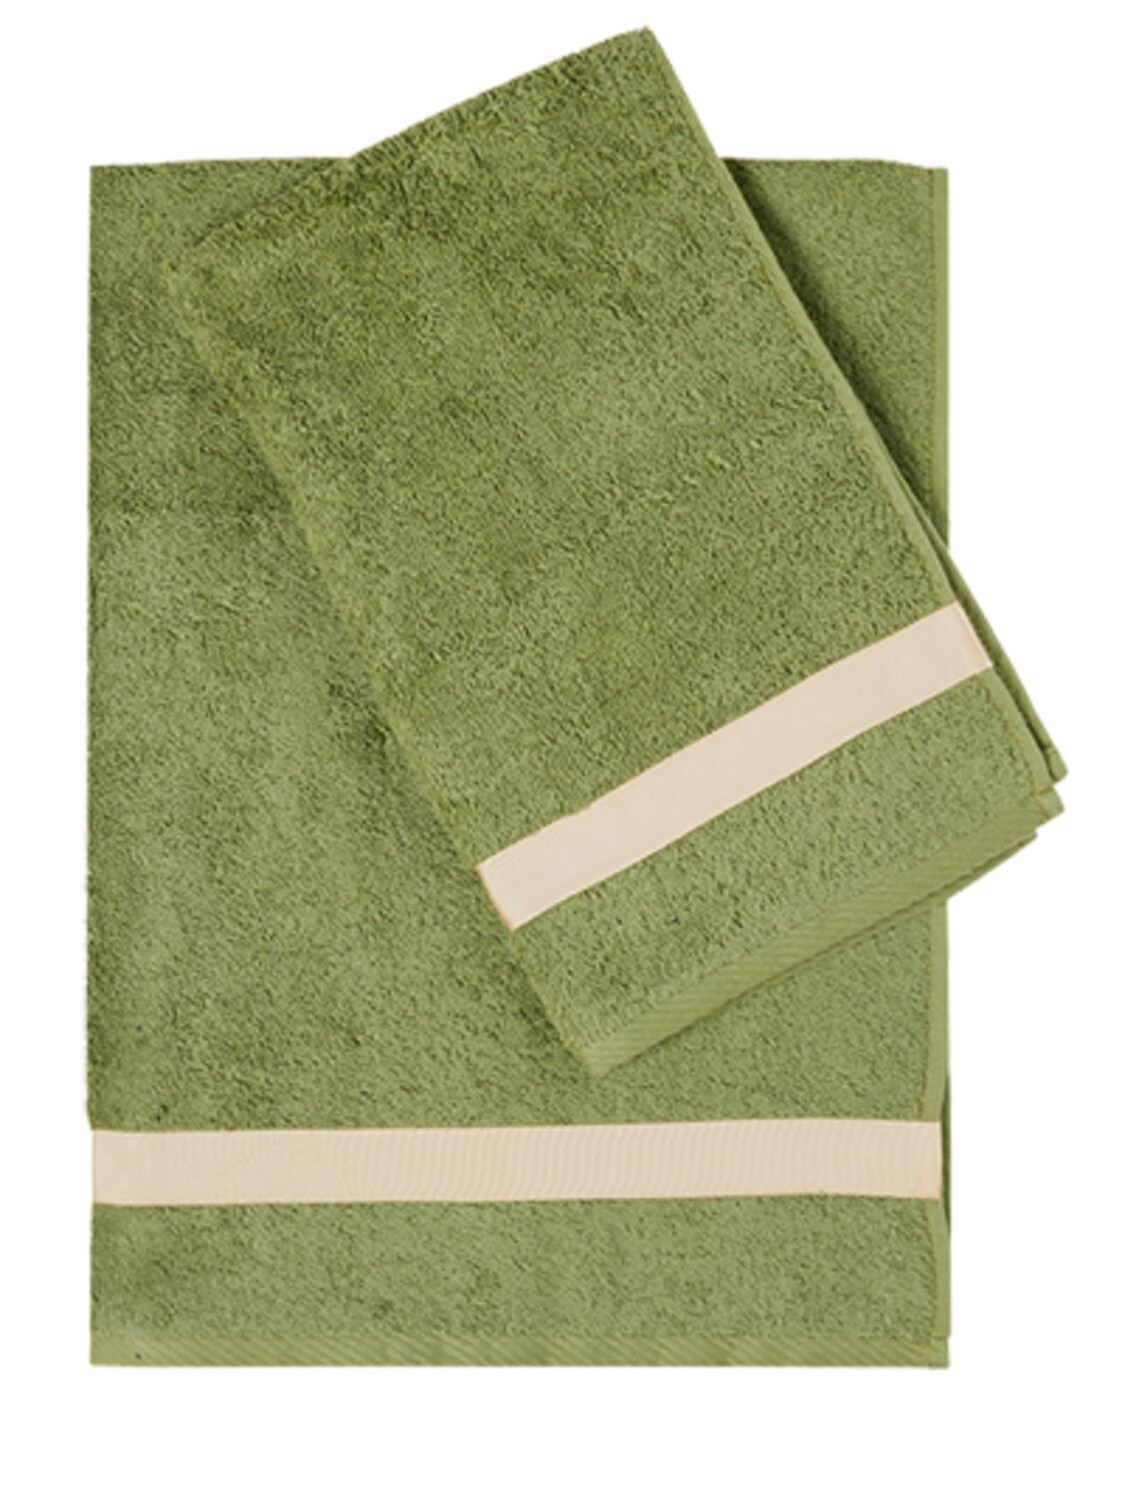 Alessandro Di Marco Set Of 2 Cotton Terrycloth Towels In Green